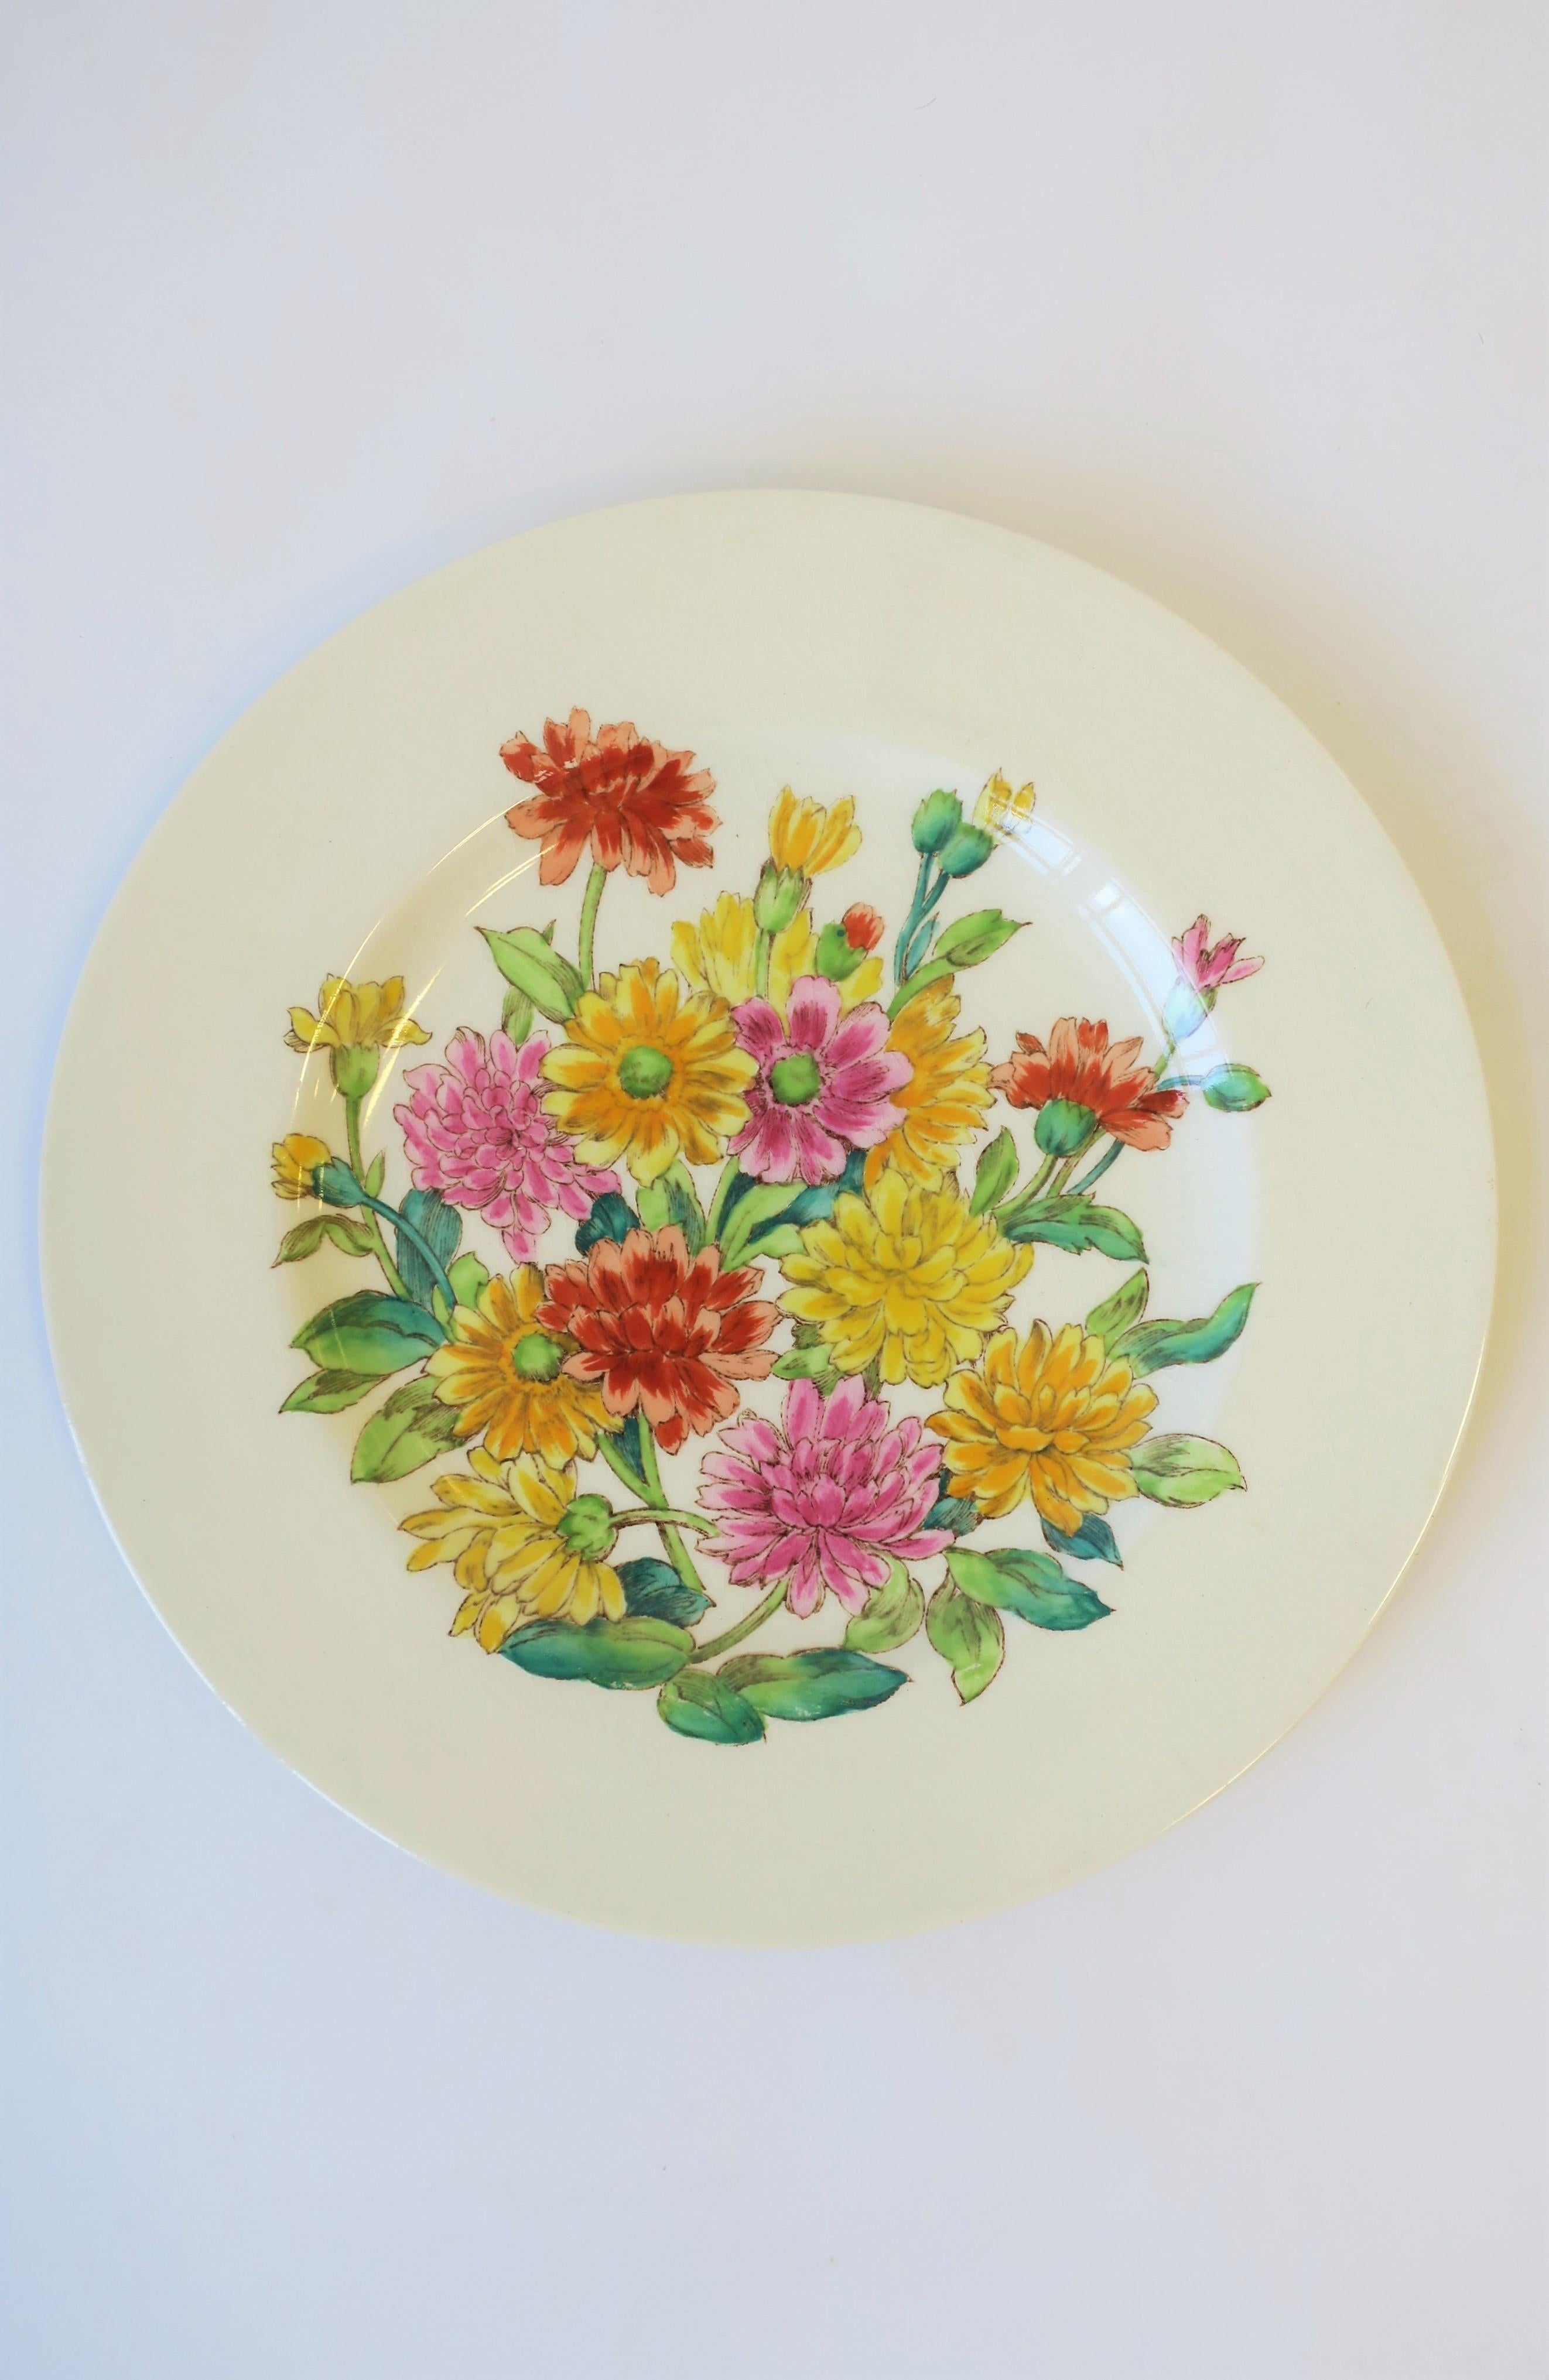 A beautiful English plate depicting Zinnia flowers, circa early-20th century, England. Flower colors include pink, red/orange, and yellow, with green leaves and vines. A beautiful plate for eating/entertaining or as wall art. Marked 